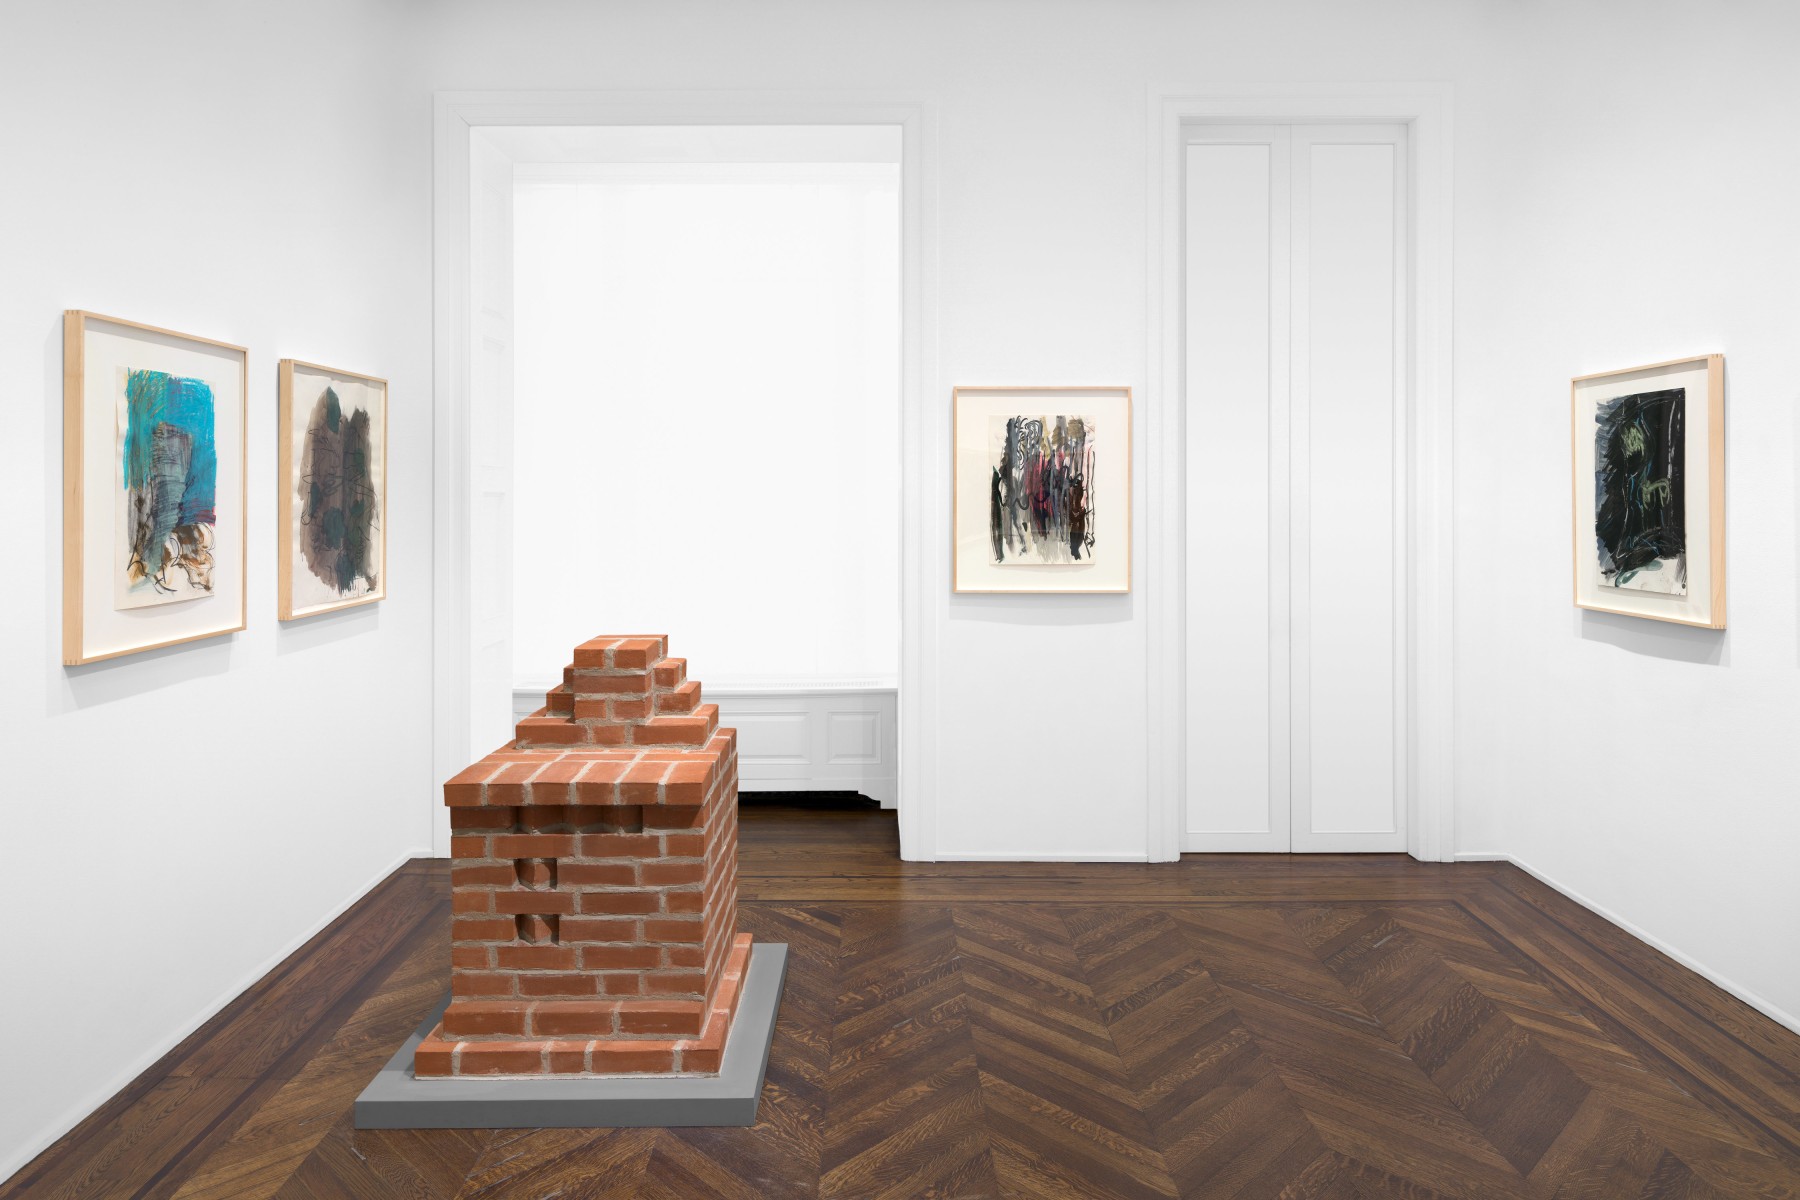 PER KIRKEBY Works on Paper, Works in Brick 20 November 2019 through 25 January 2020 UPPER EAST SIDE, NEW YORK, Installation View 14